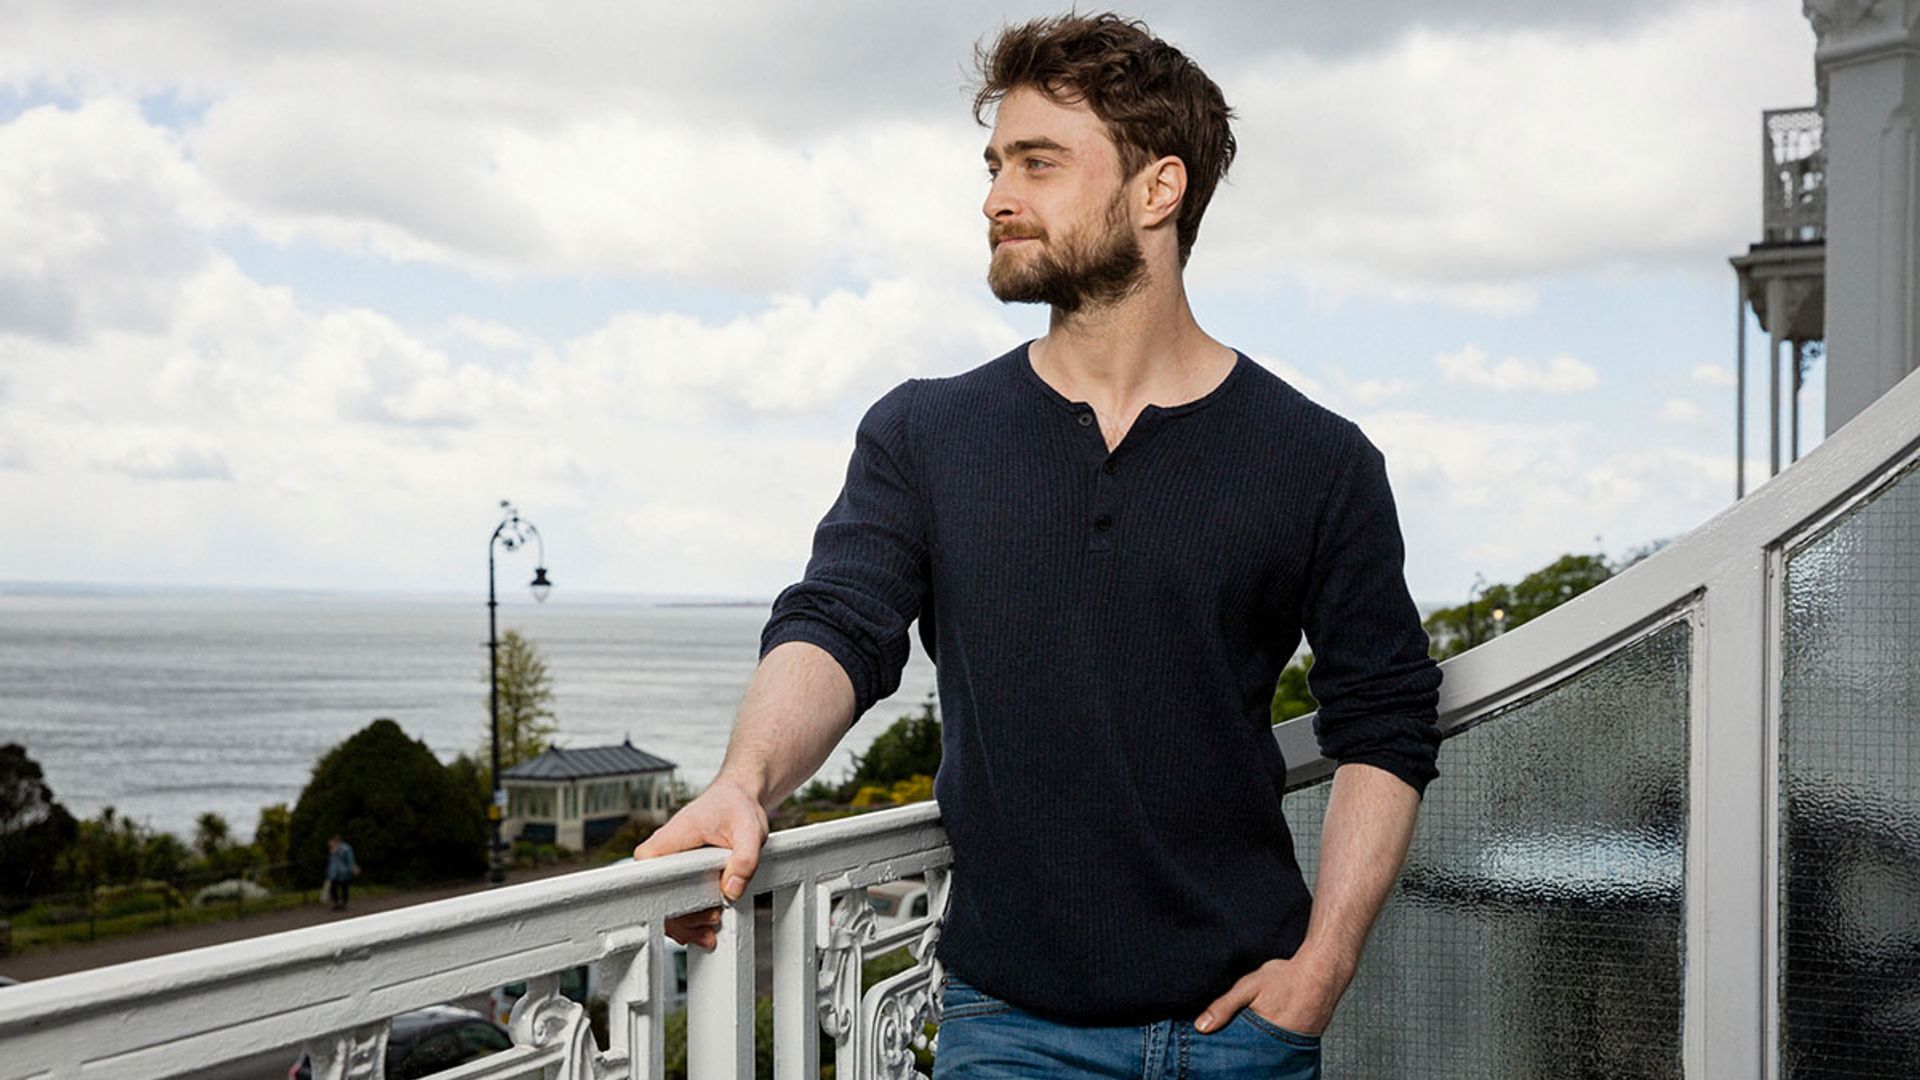 Daniel Radcliffe breaks down in tears after reading ancestor's suicide note on Who Do You Think You Are?